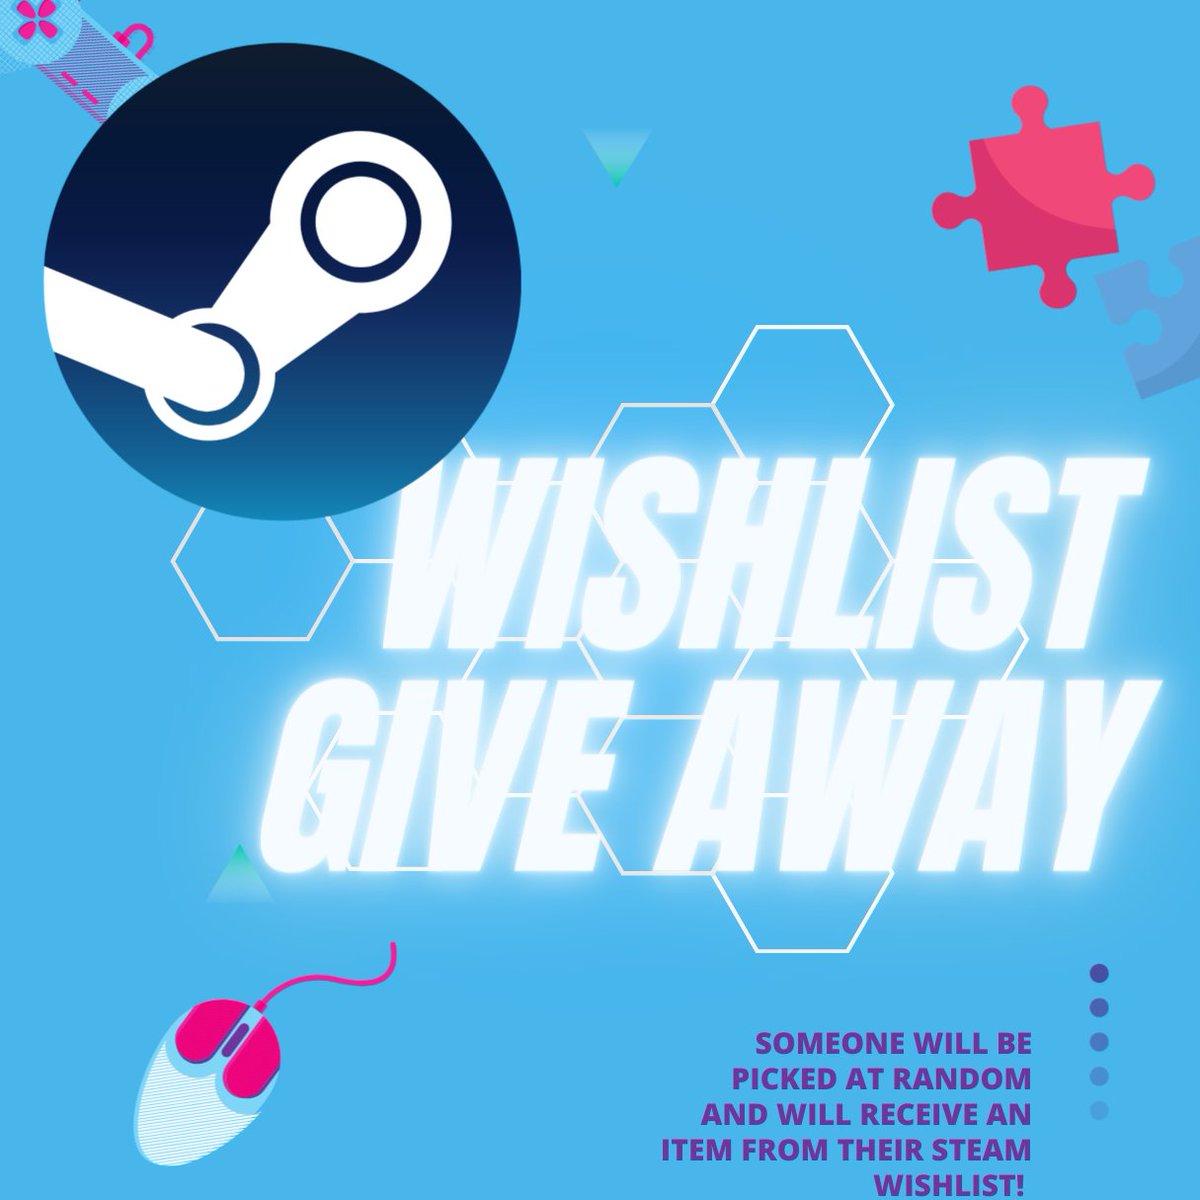 🎁🎁Give Away🎁🎁
I'm in a giving mood again, so would like to treat one lucky person to a random steam game from their wishlist! To enter. Just follow, retweet, comment what game you would hope to win, and tag 2 friends. Simples. winner randomly selected will be DM'd. GOOD luck